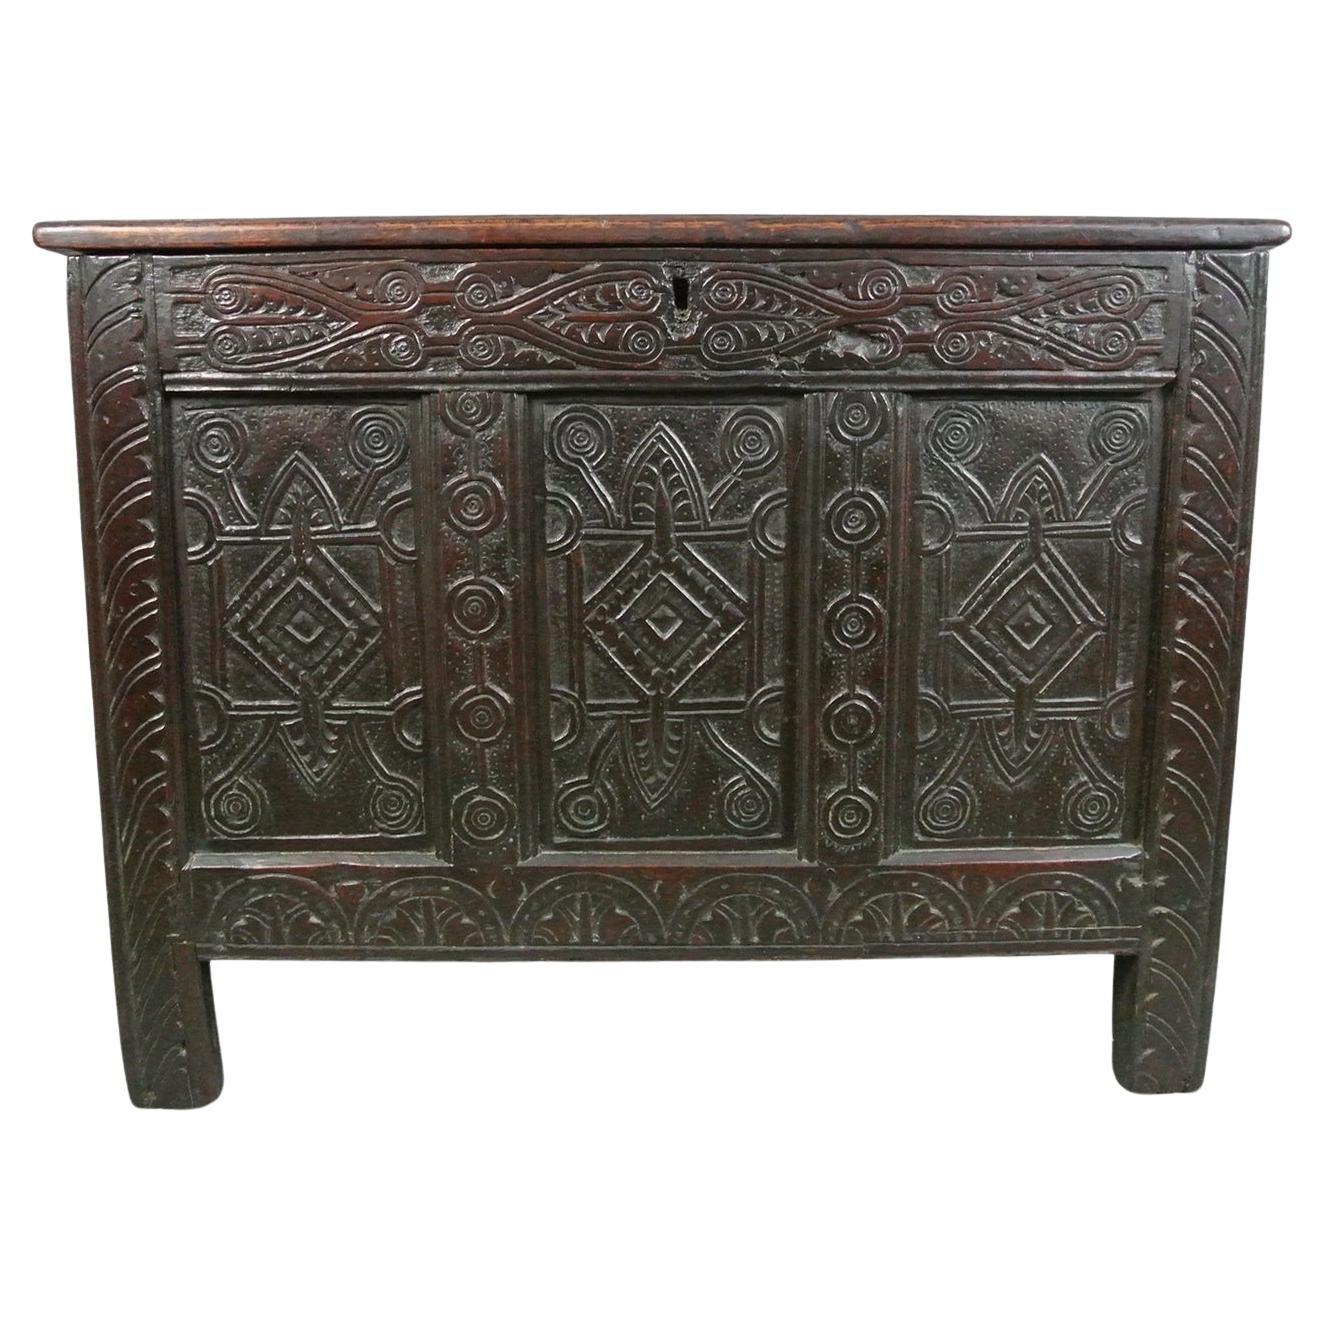 A Very Good Early English Oak Coffer c. 1600 For Sale